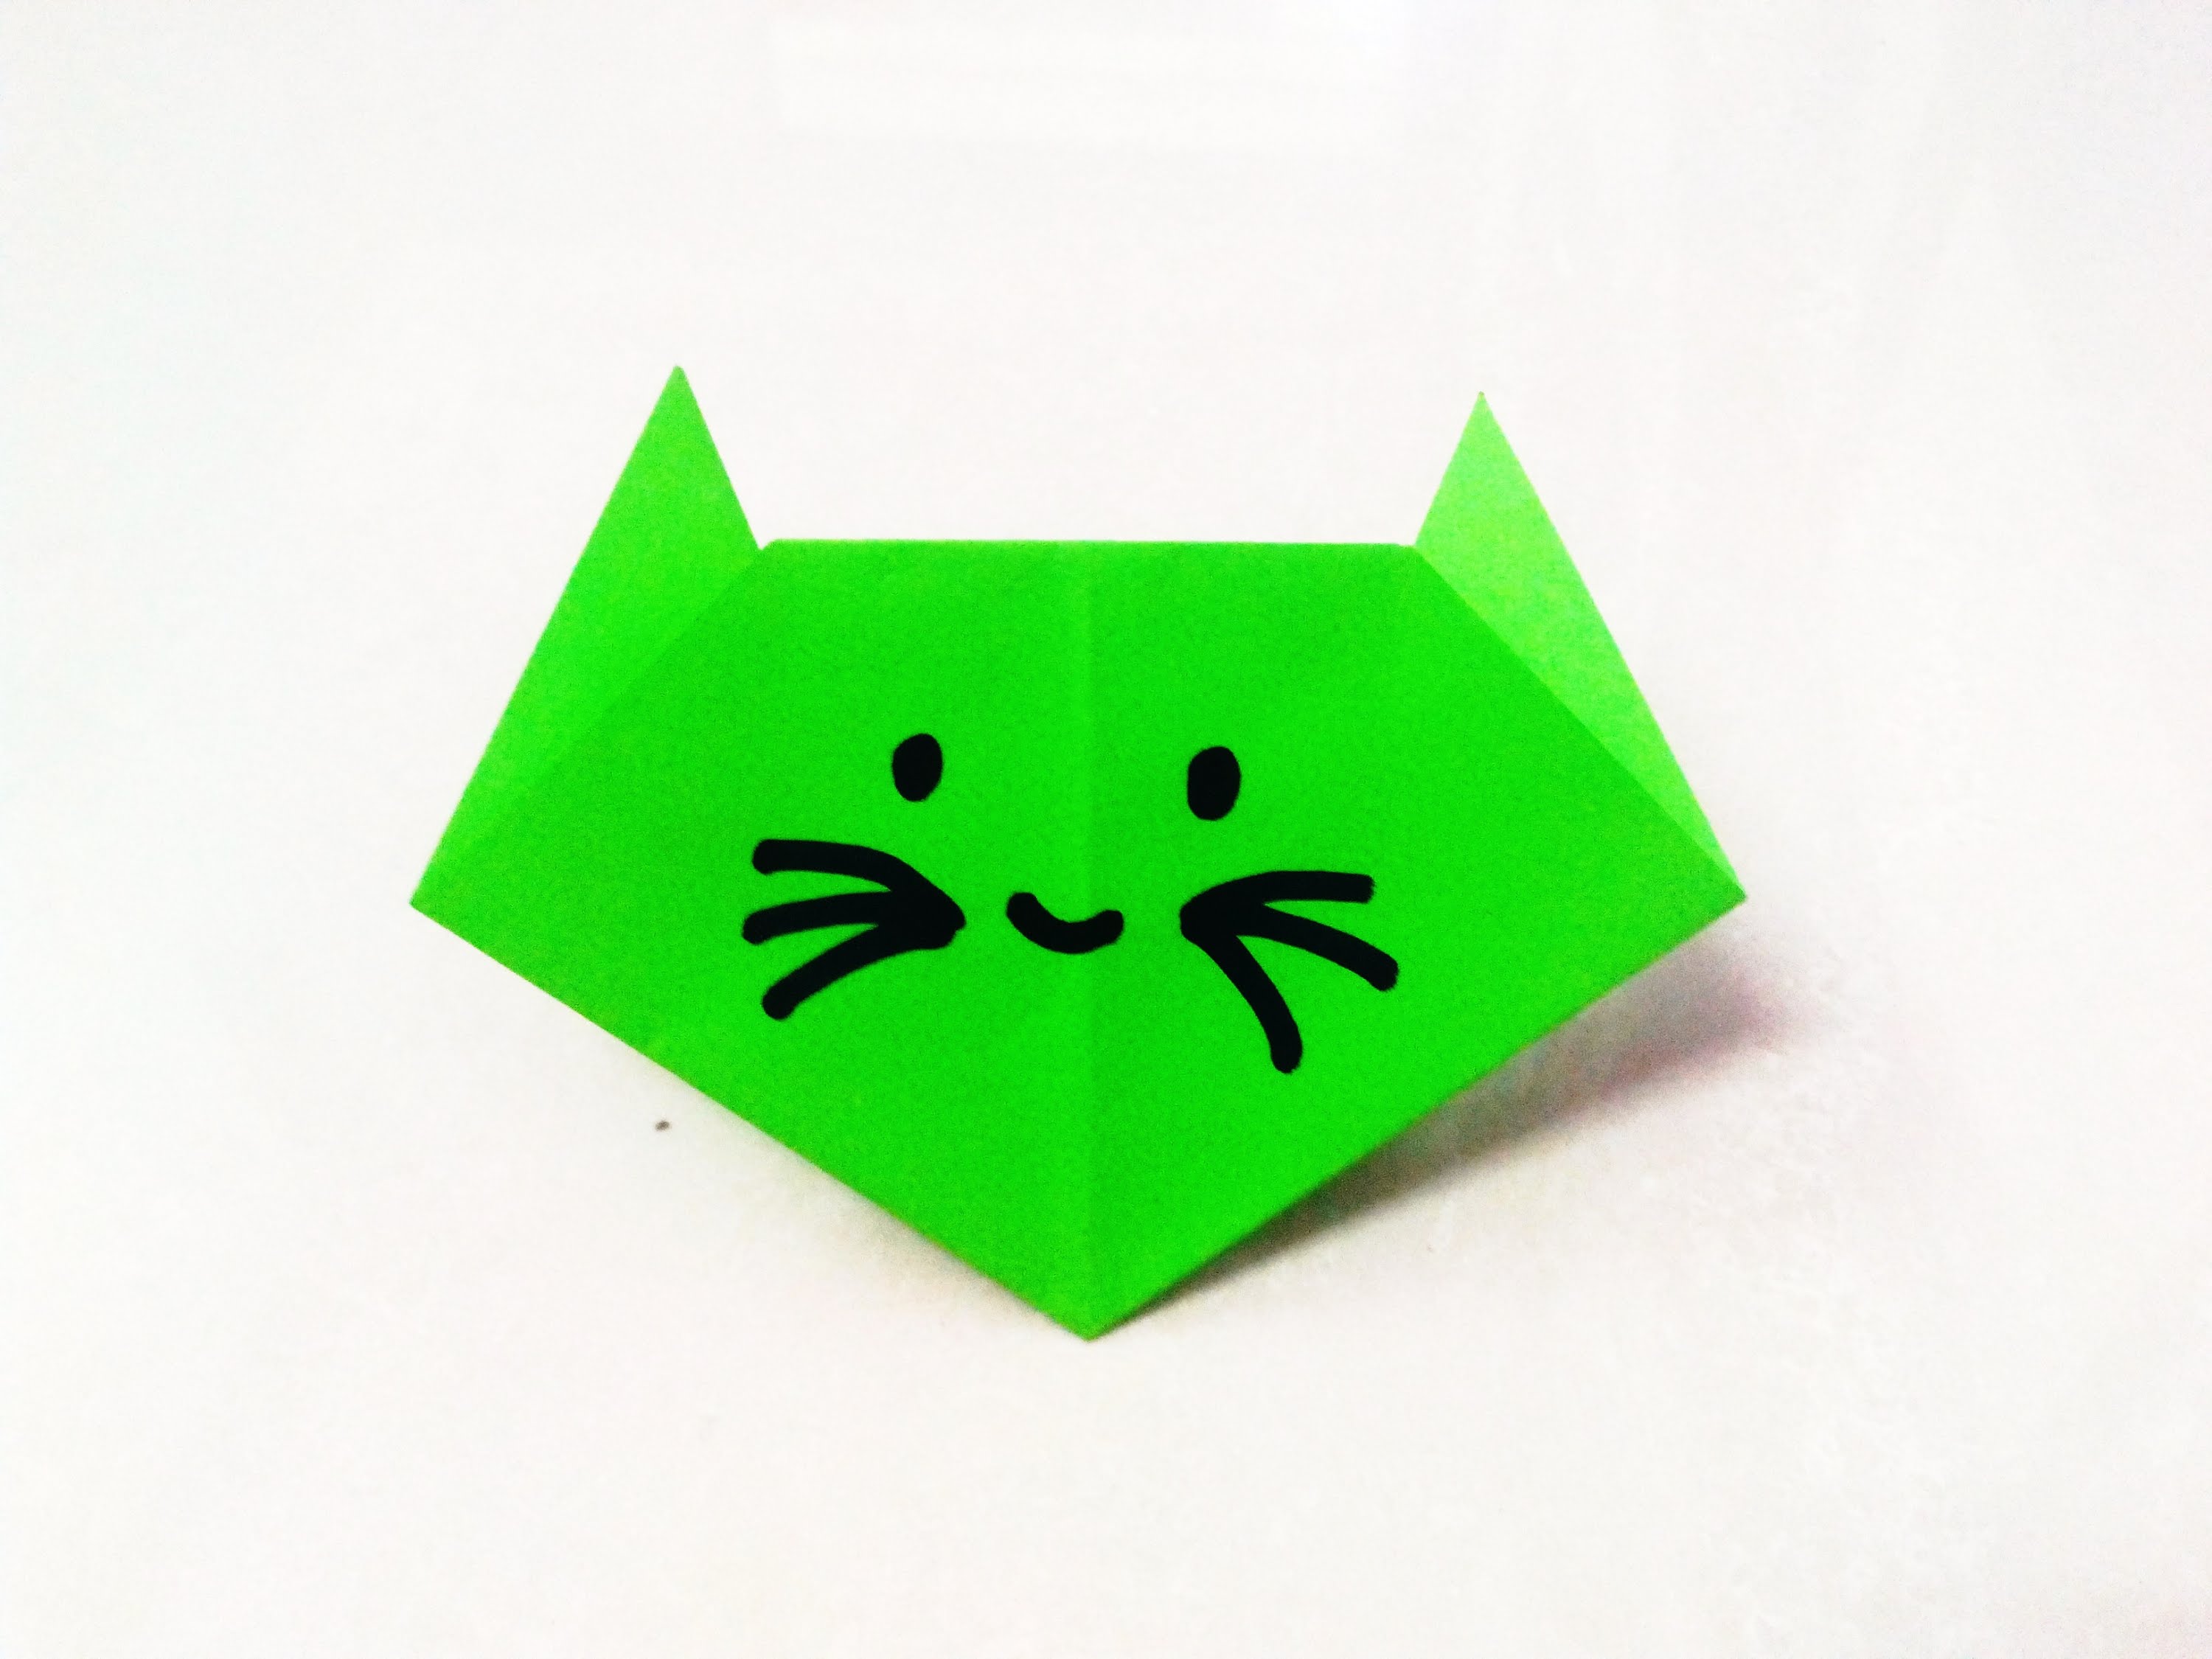 How to make an origami paper cat | Origami / Paper Folding Craft ...